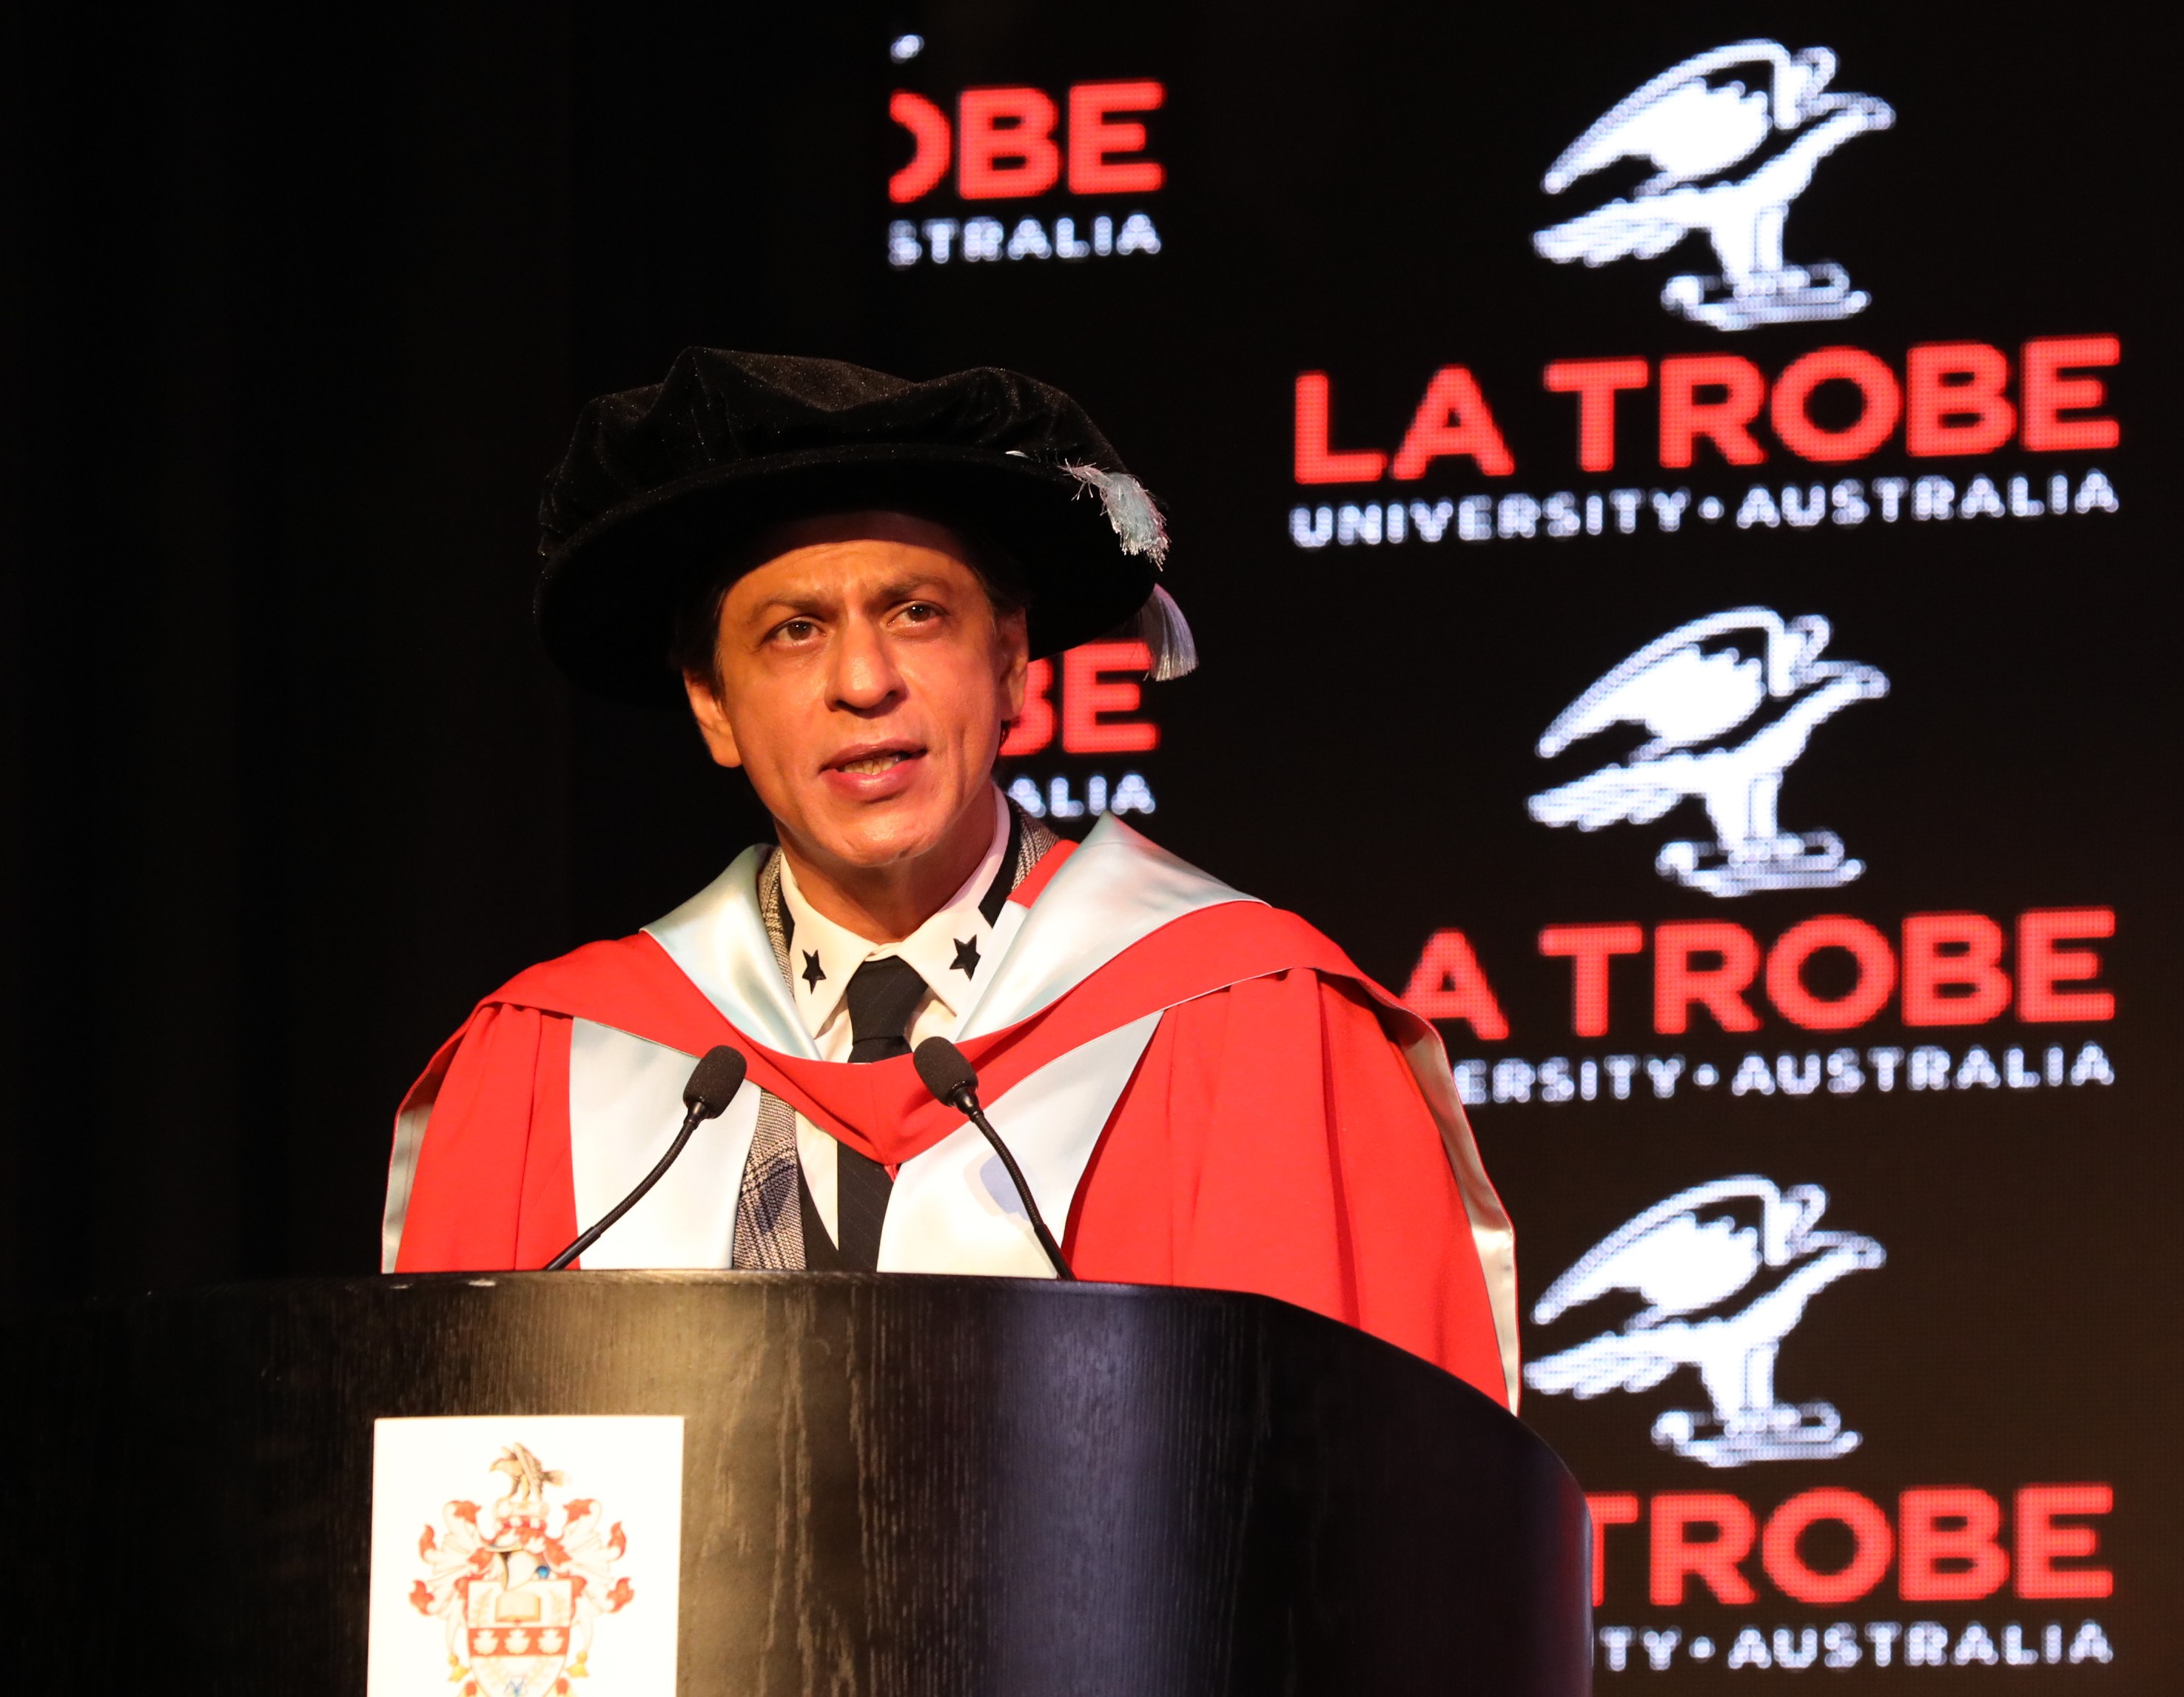 Shah Rukh Khan, Union Hall, Conferral of Honorary Doctorate